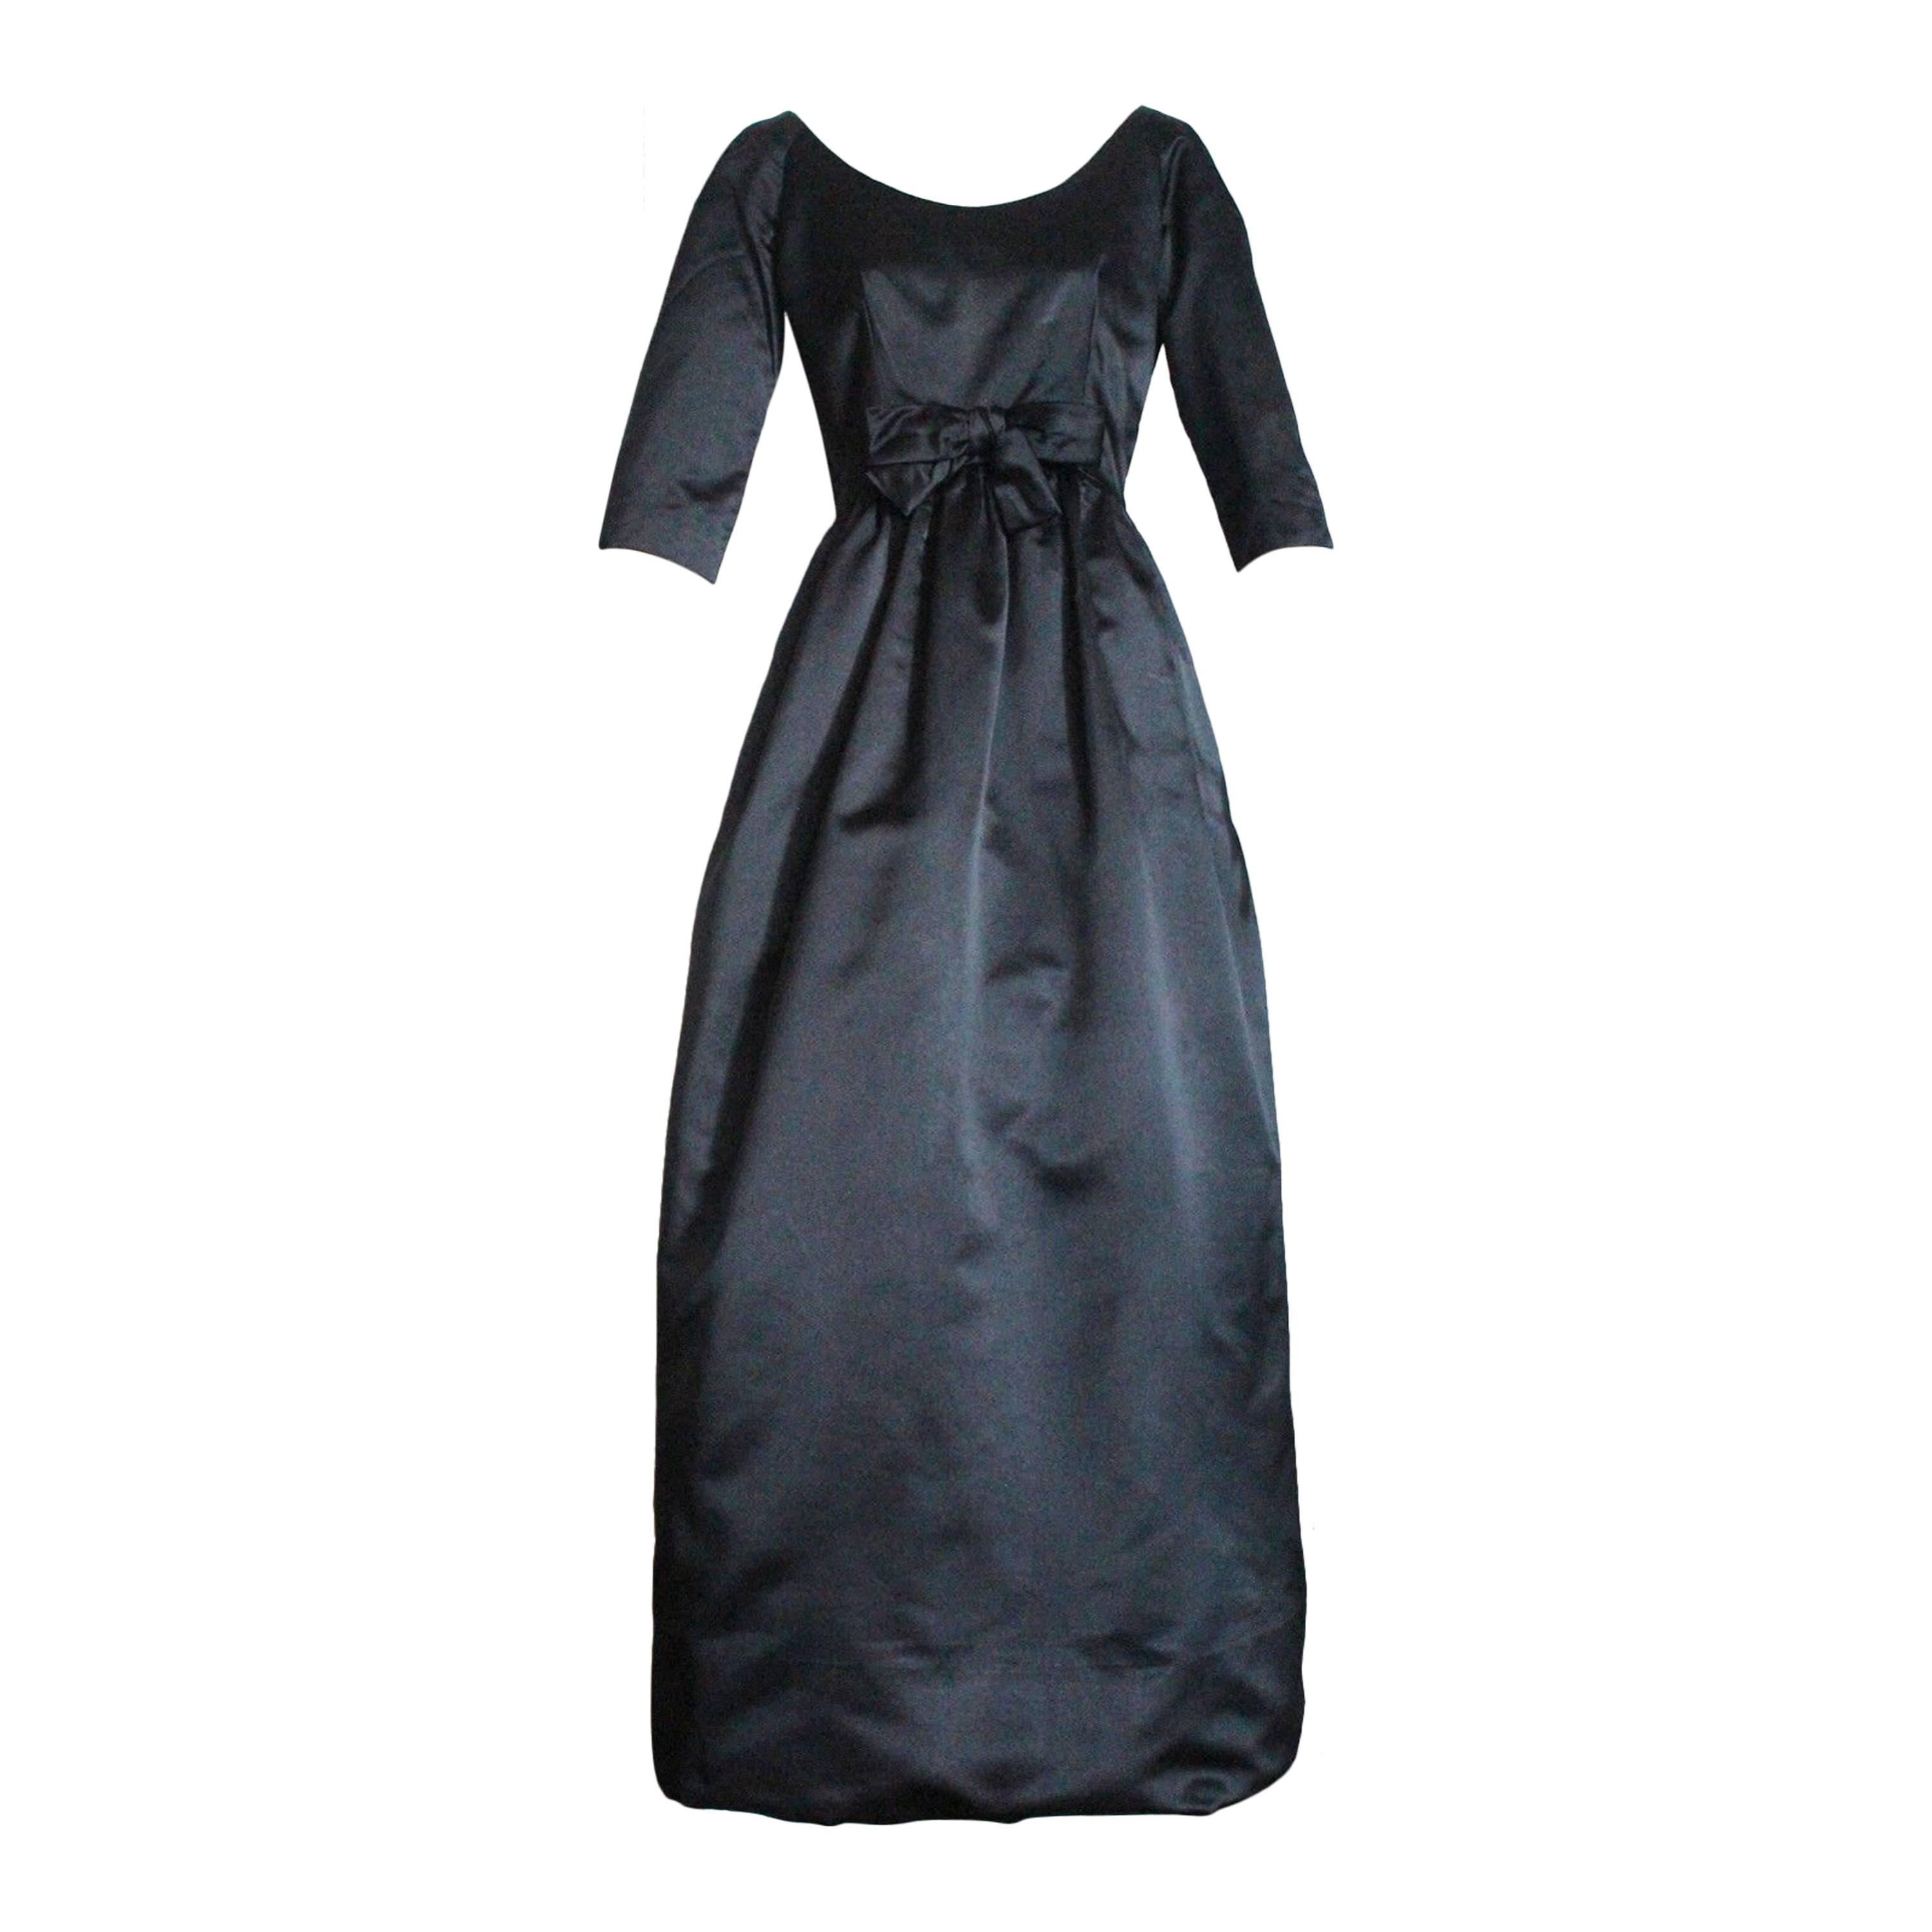 Museum Quality 1958 Christian Dior Black Satin Evening Dress With Bow For Sale